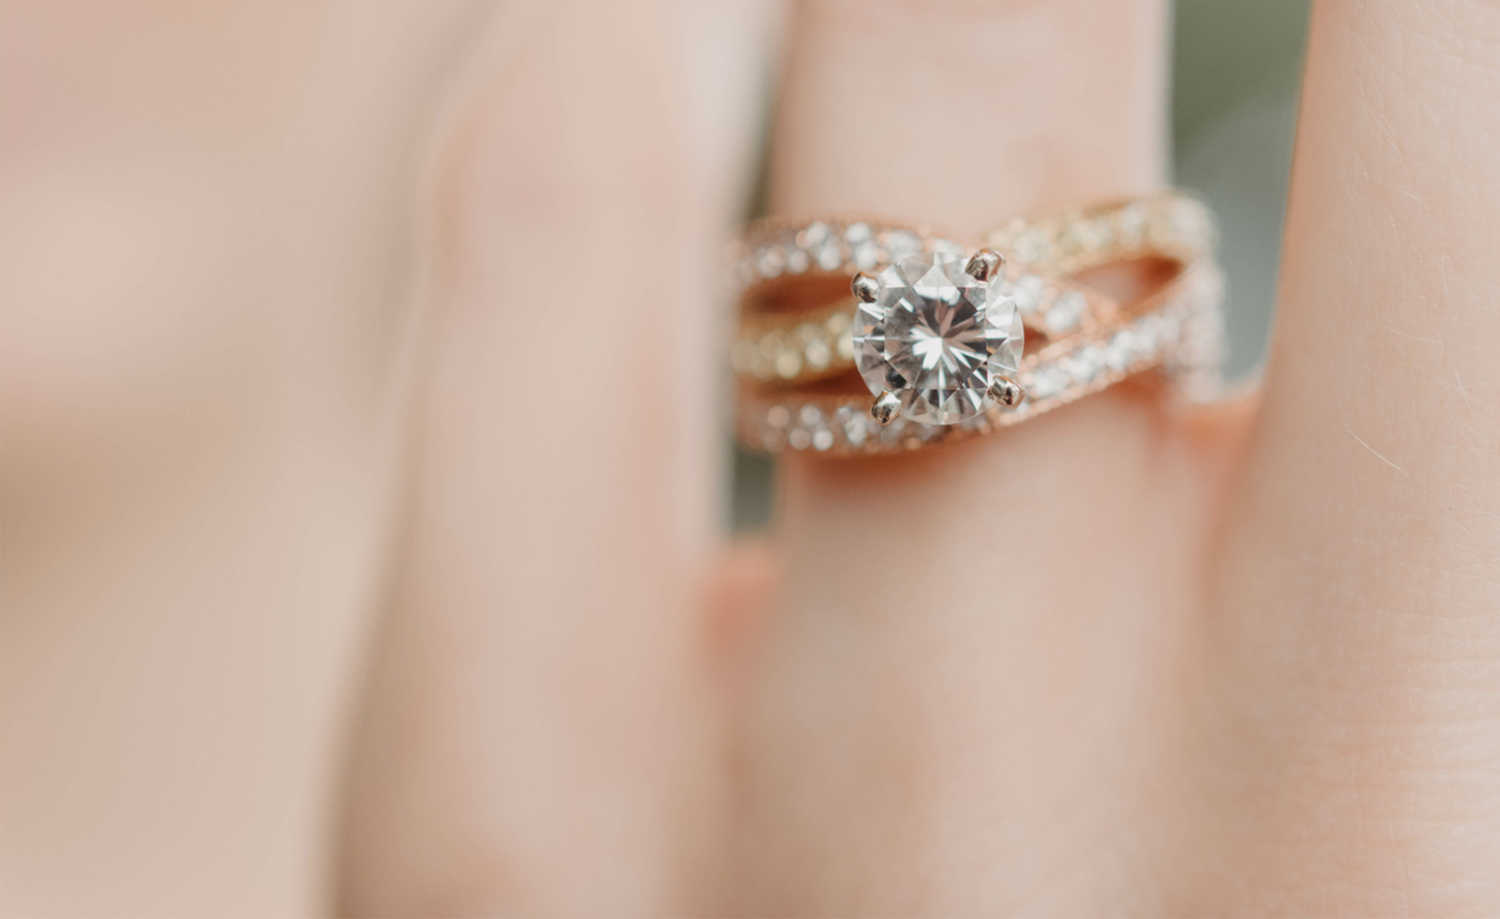 A close-up of a diamond wedding ring with a shallow depth of field.